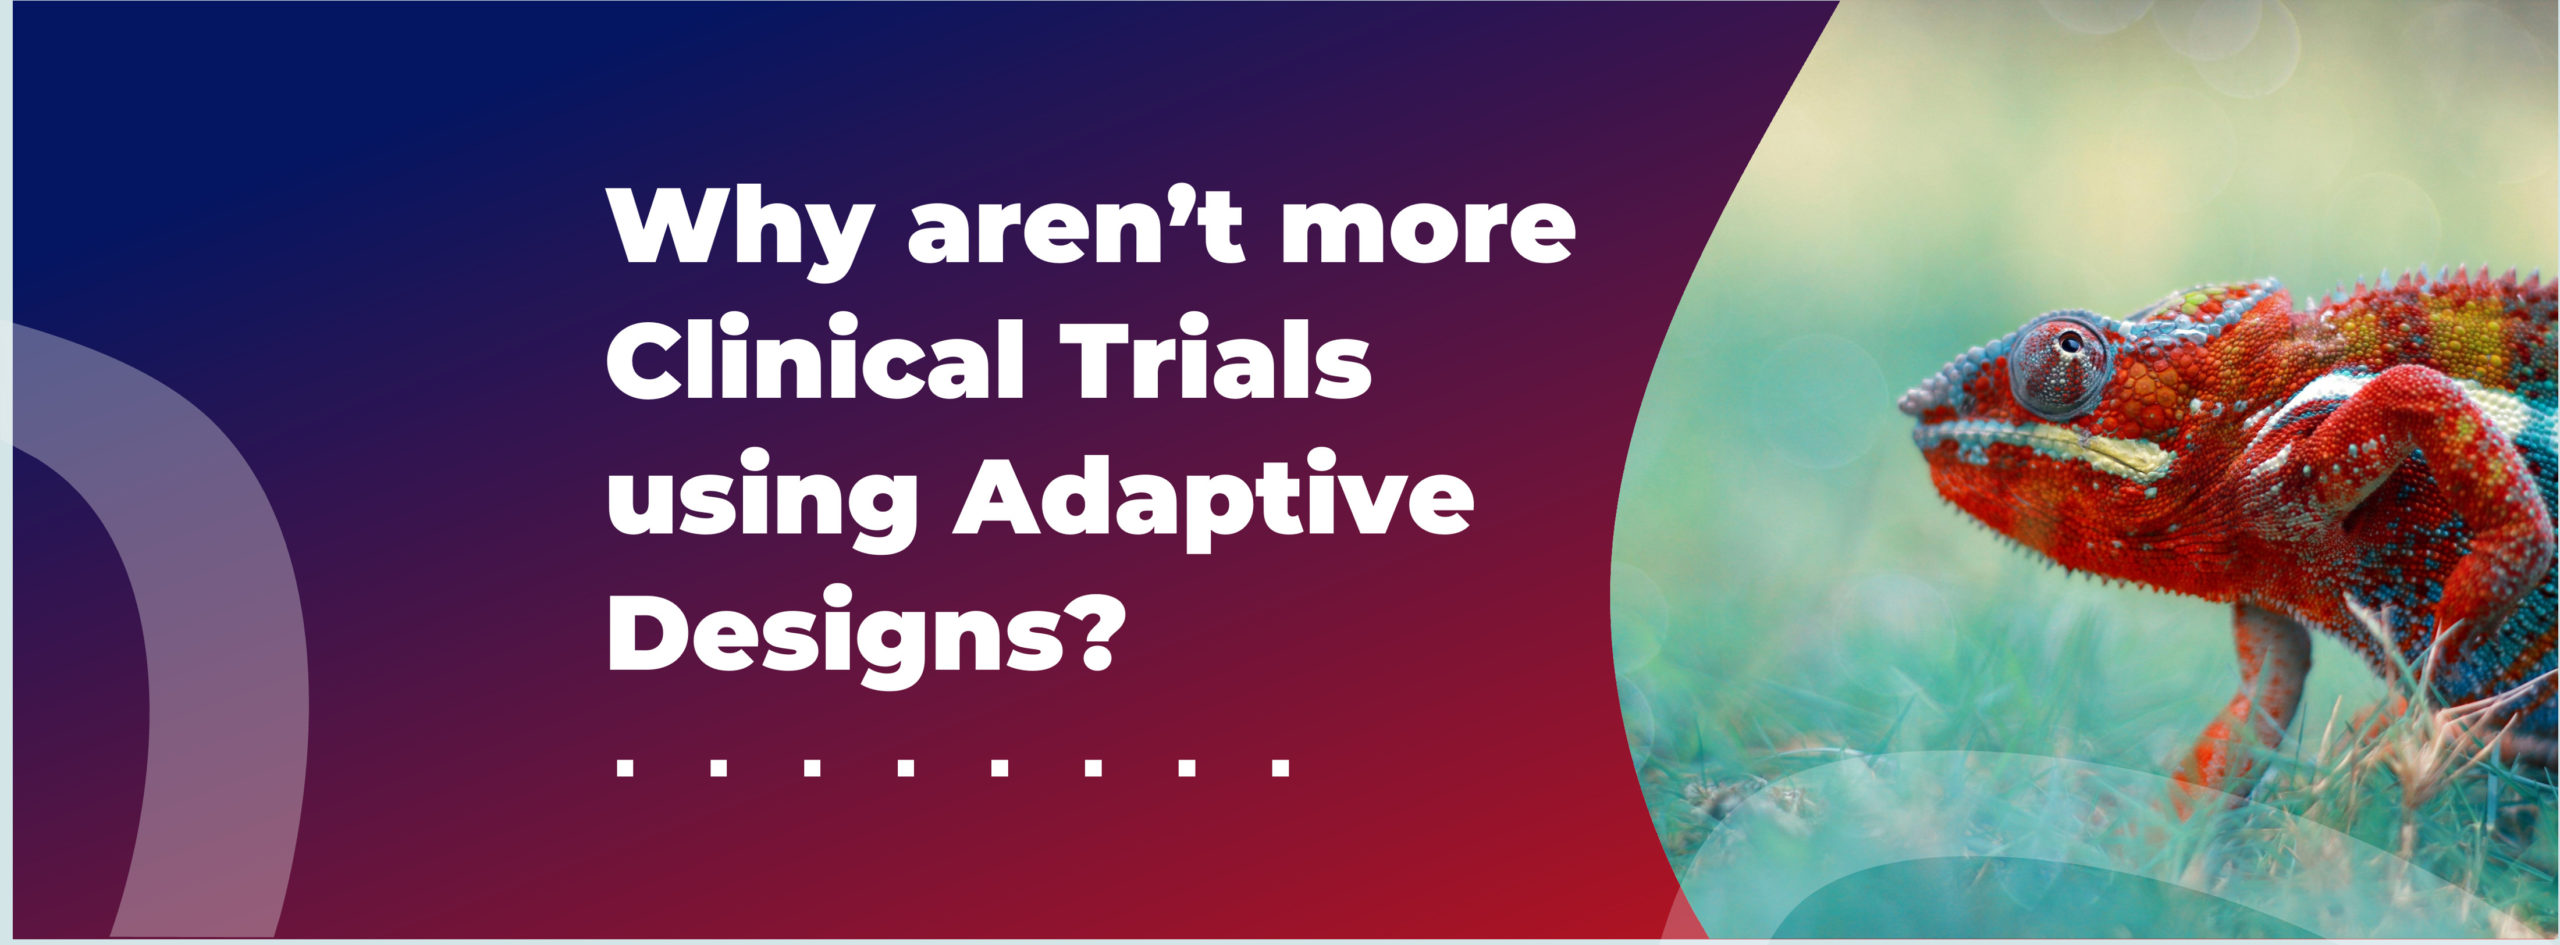 Why aren’t more Clinical Trials using Adaptive Designs